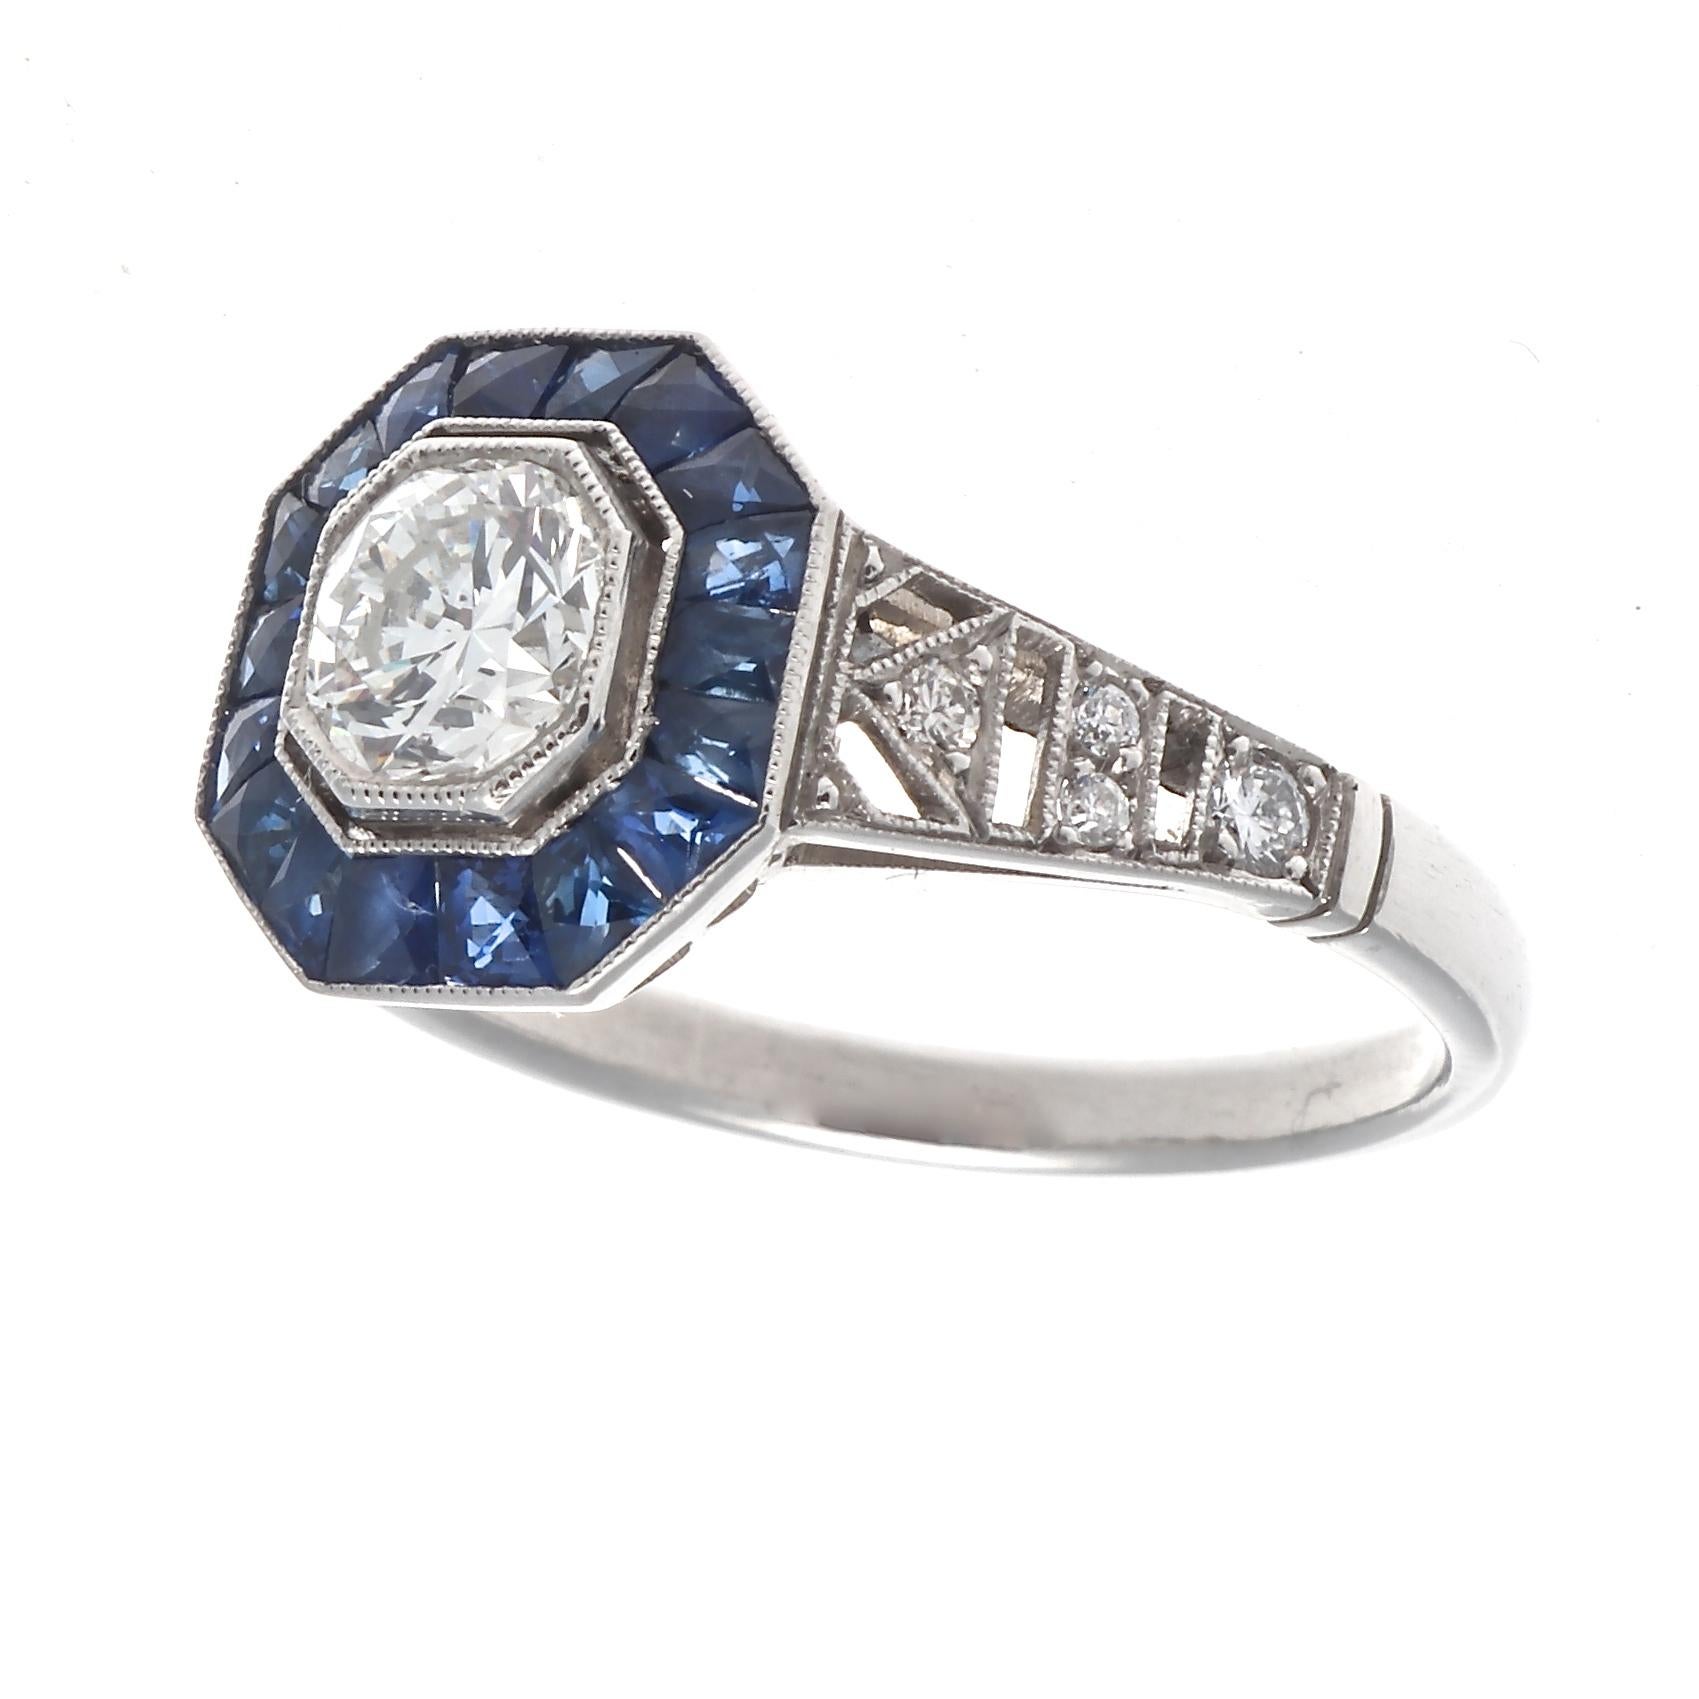  A traditional idea synthesized with a symphony of color. The perfect way to remember old times and good times to come, with your loved one. Featuring a 0.68 carat round brilliant cut diamond that is approximately G color, VS1 clarity. Crafted in